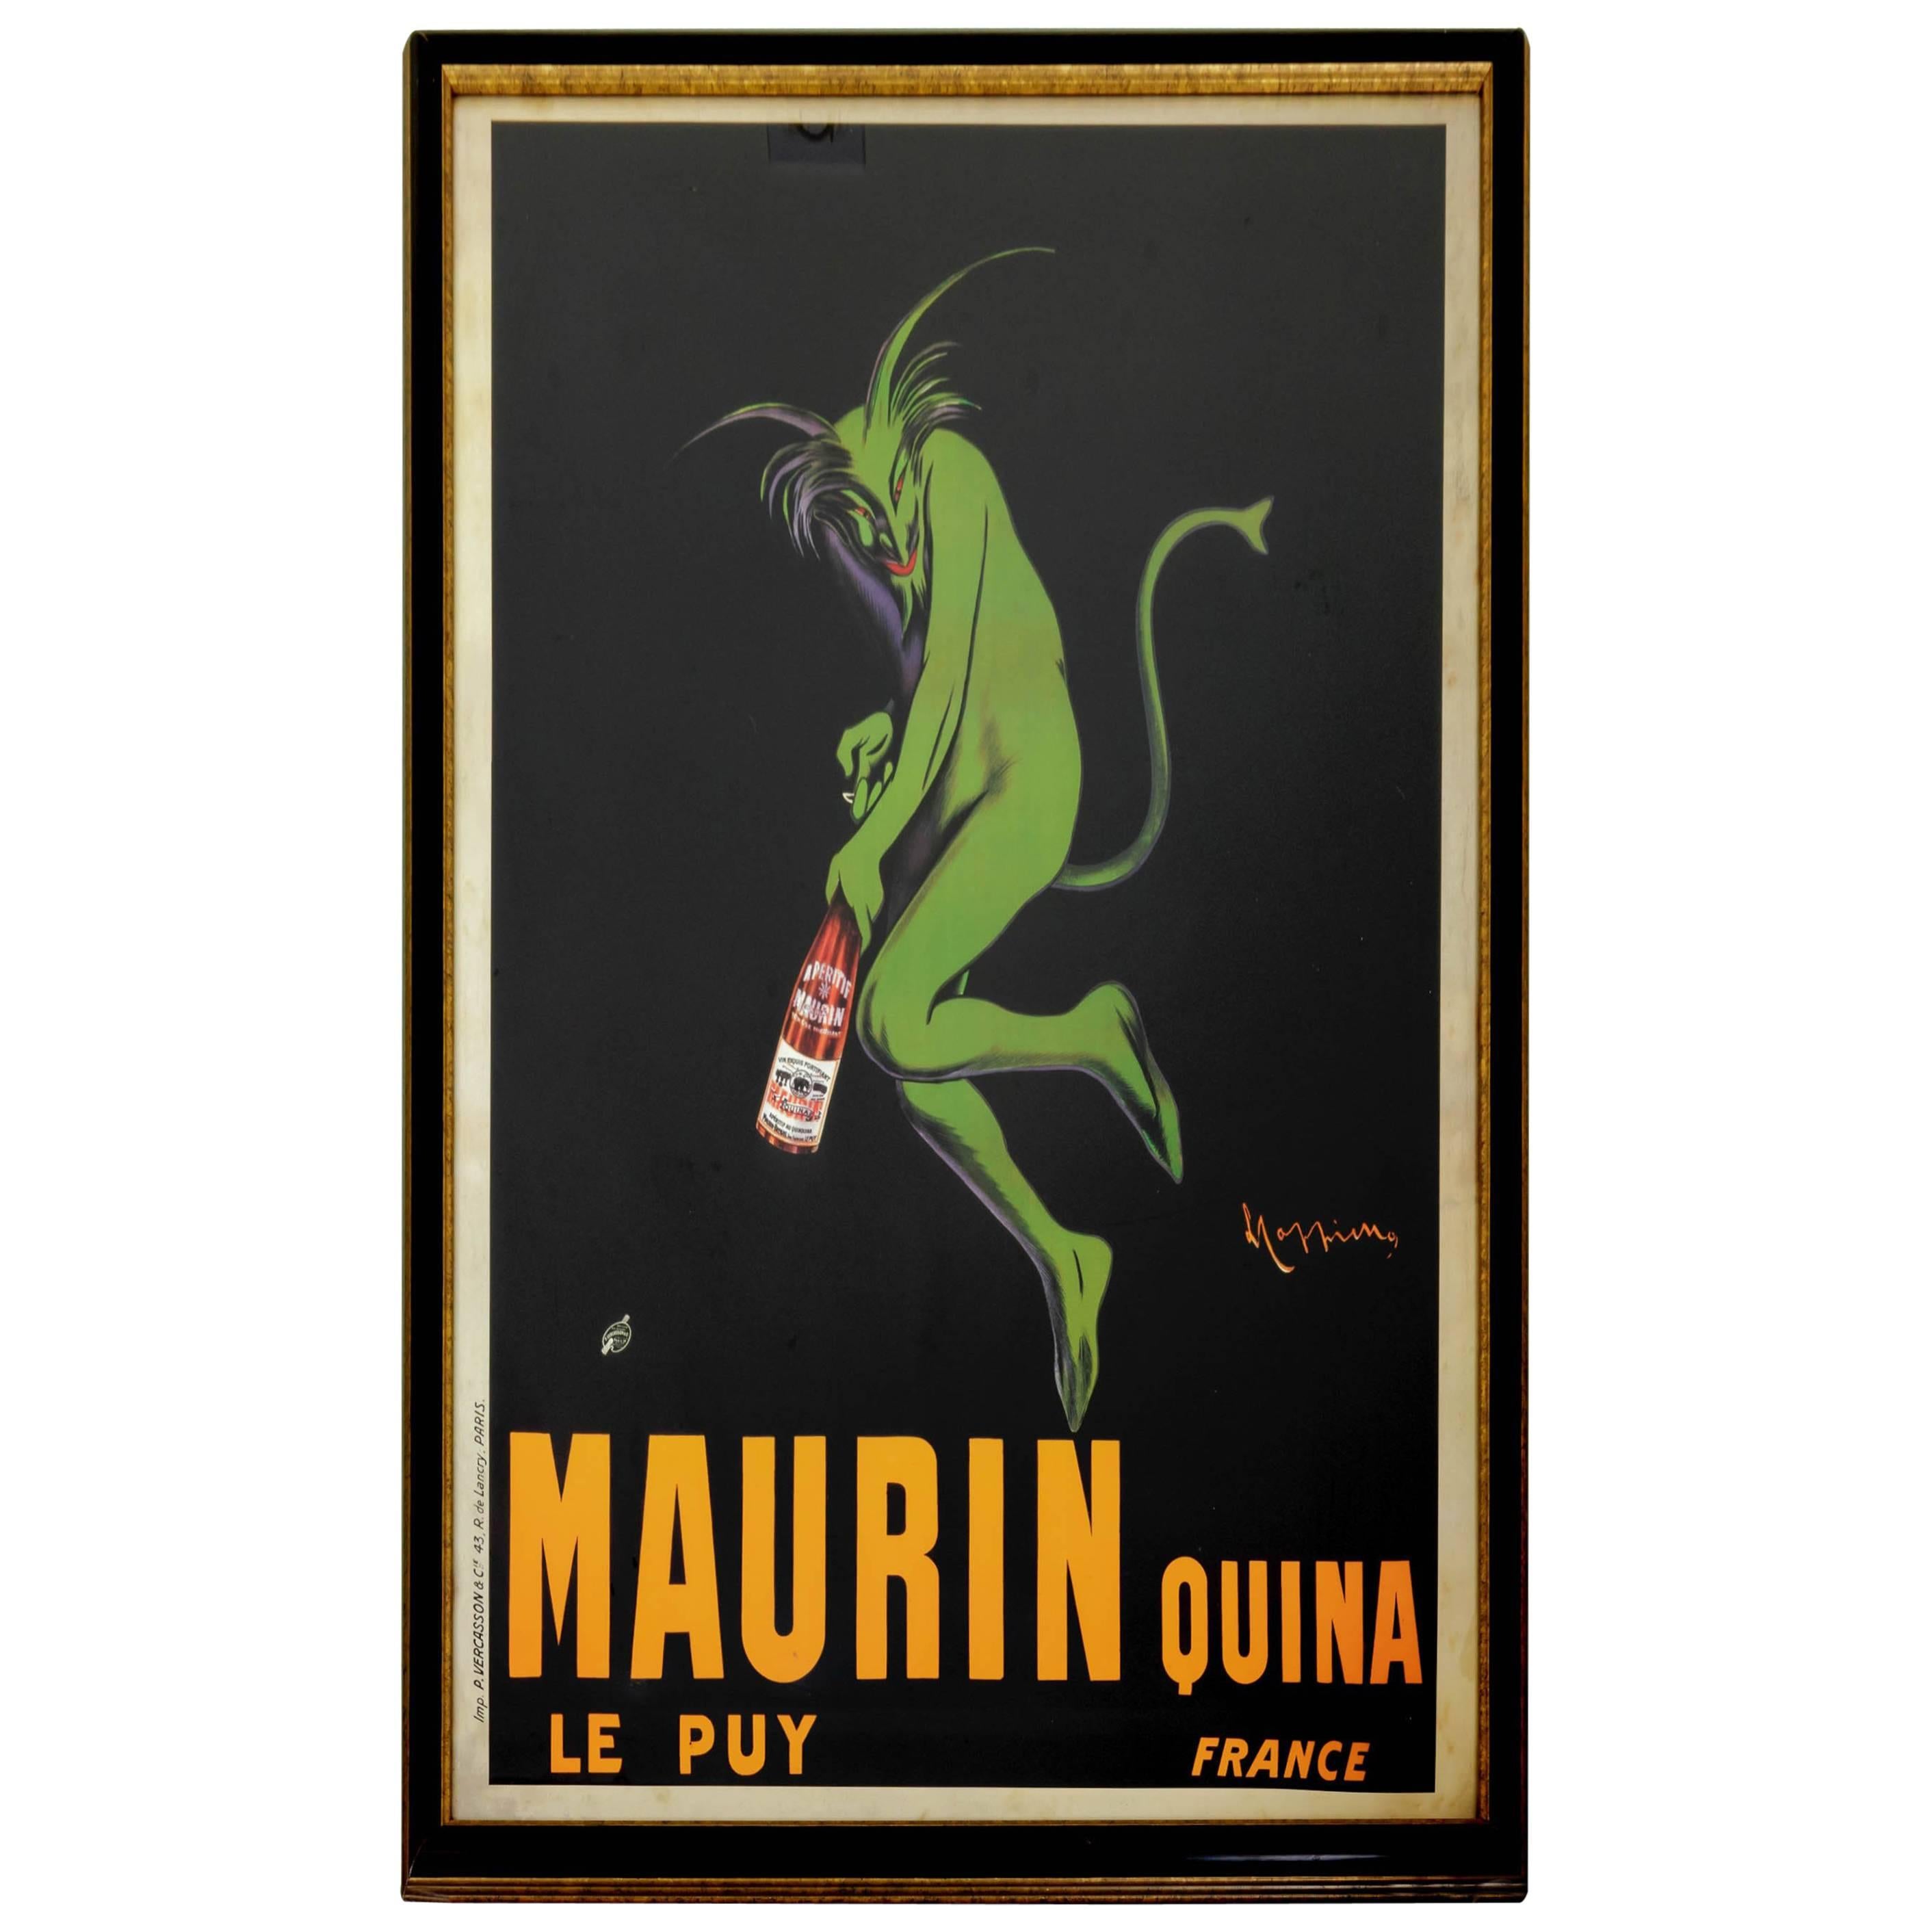 Famous Capiello French wine and spirits poster. Poster depicting green devil opening a bottle of sprits, sold by Cerutti Millar Gallery, NYC.